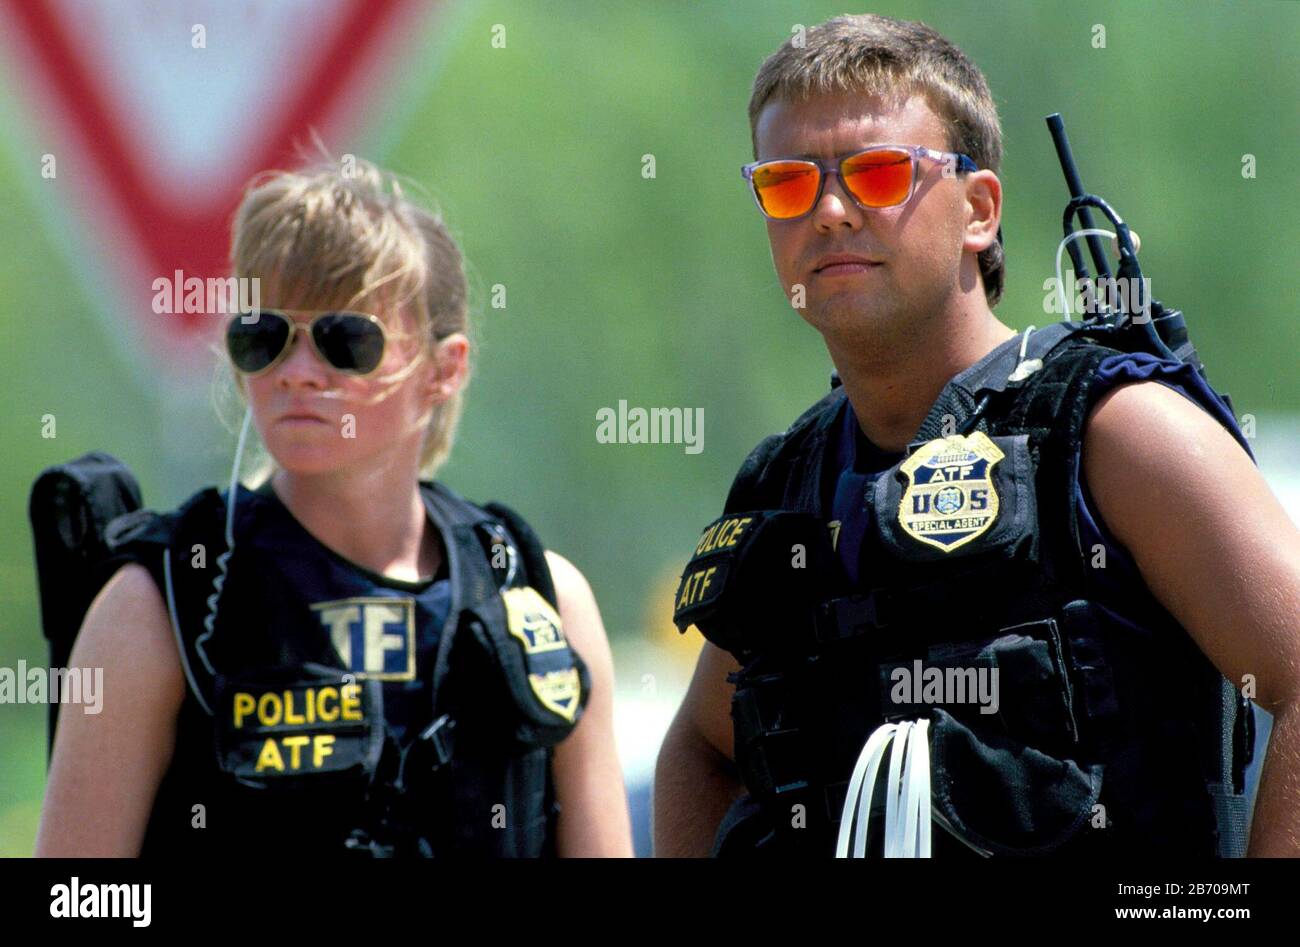 Waco, Texas USA, 1993: Female and male ATF officers on duty at standoff between ATF agents and the members of the Branch Davidian religious cult. ©Bob Daemmrich Stock Photo